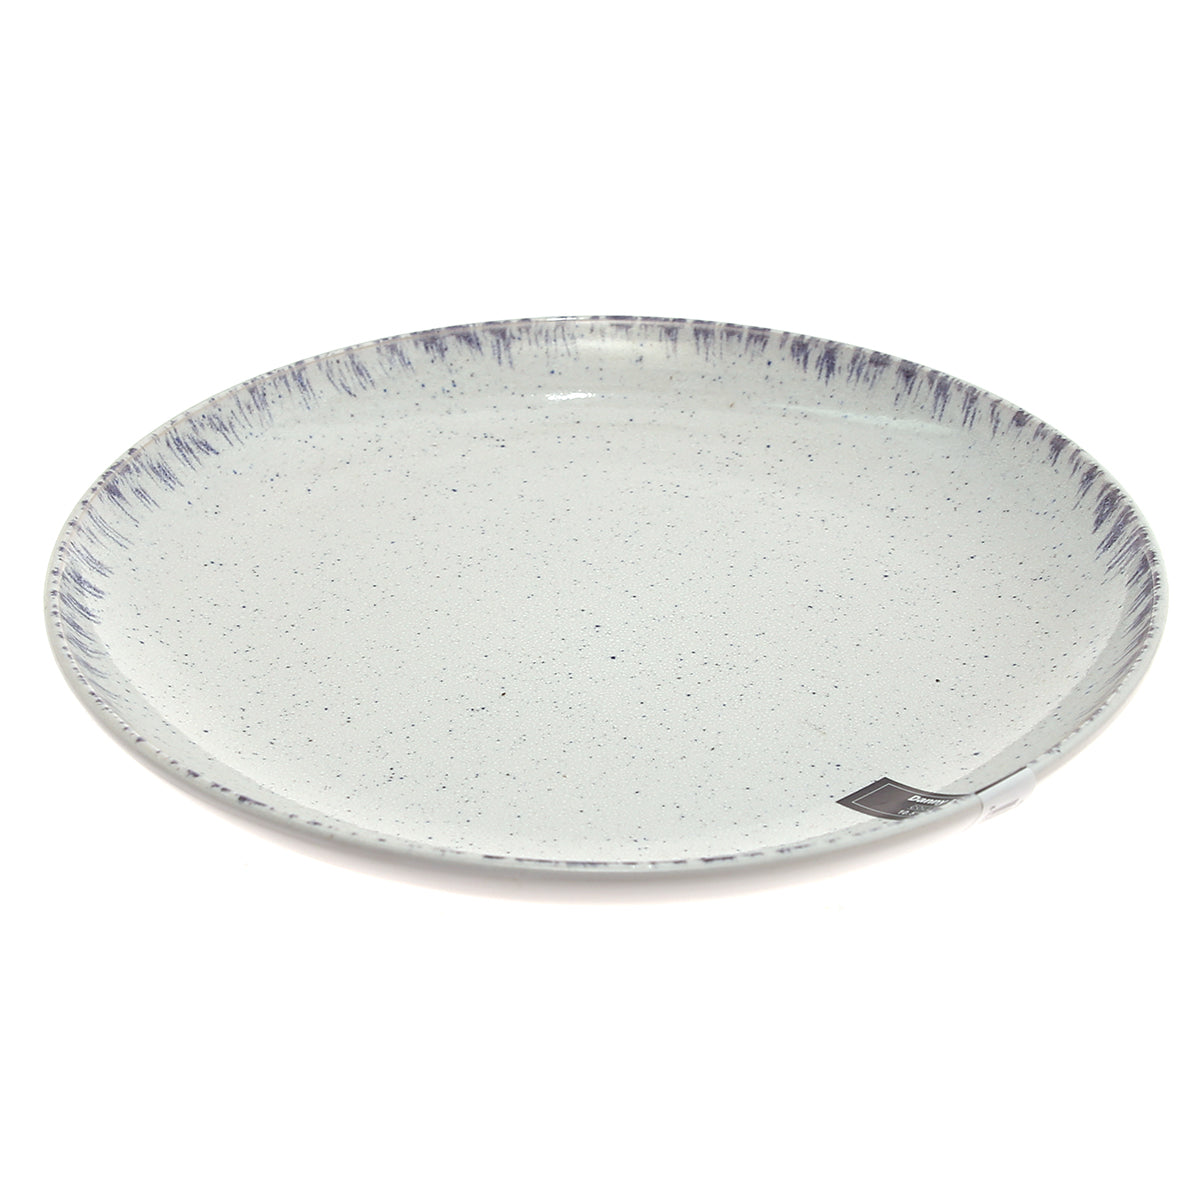 T34-01 10.5 Dinner Plate DH